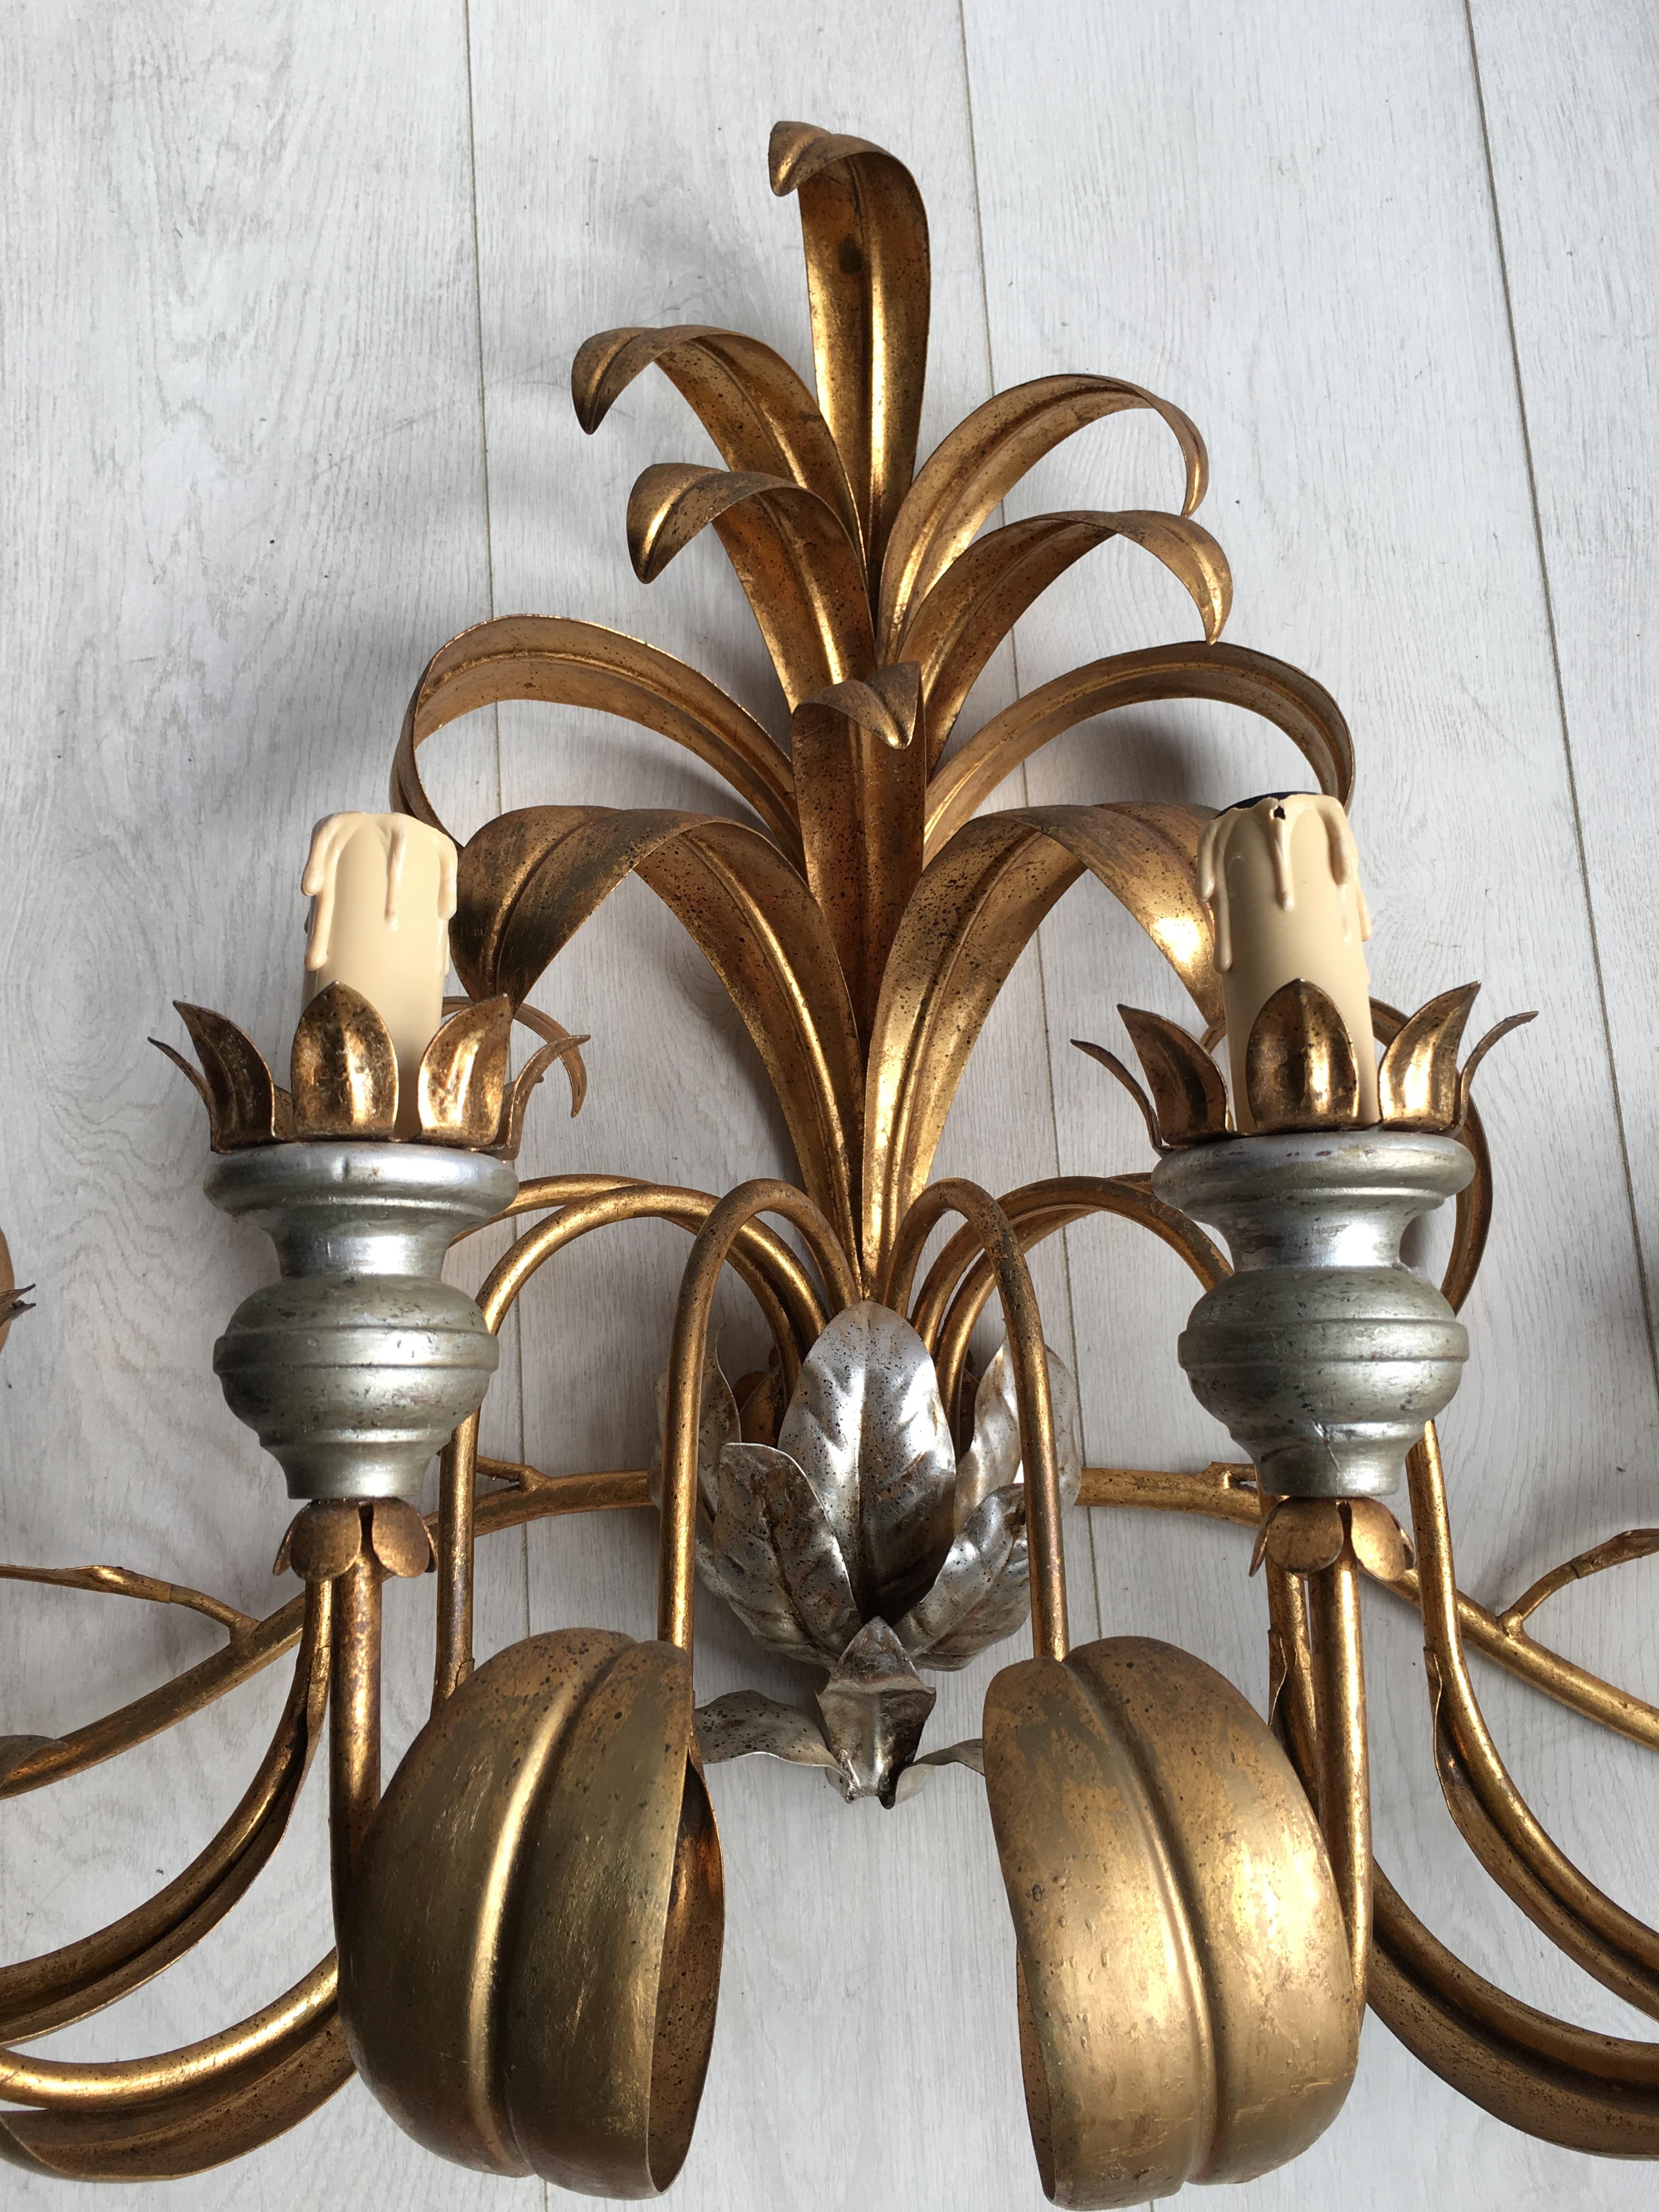 A decorative vintage French wall sconce with 6 lights in gilded metal finish

Please see close ups for finish

Measures: 100 cm wide, 59cm tall.